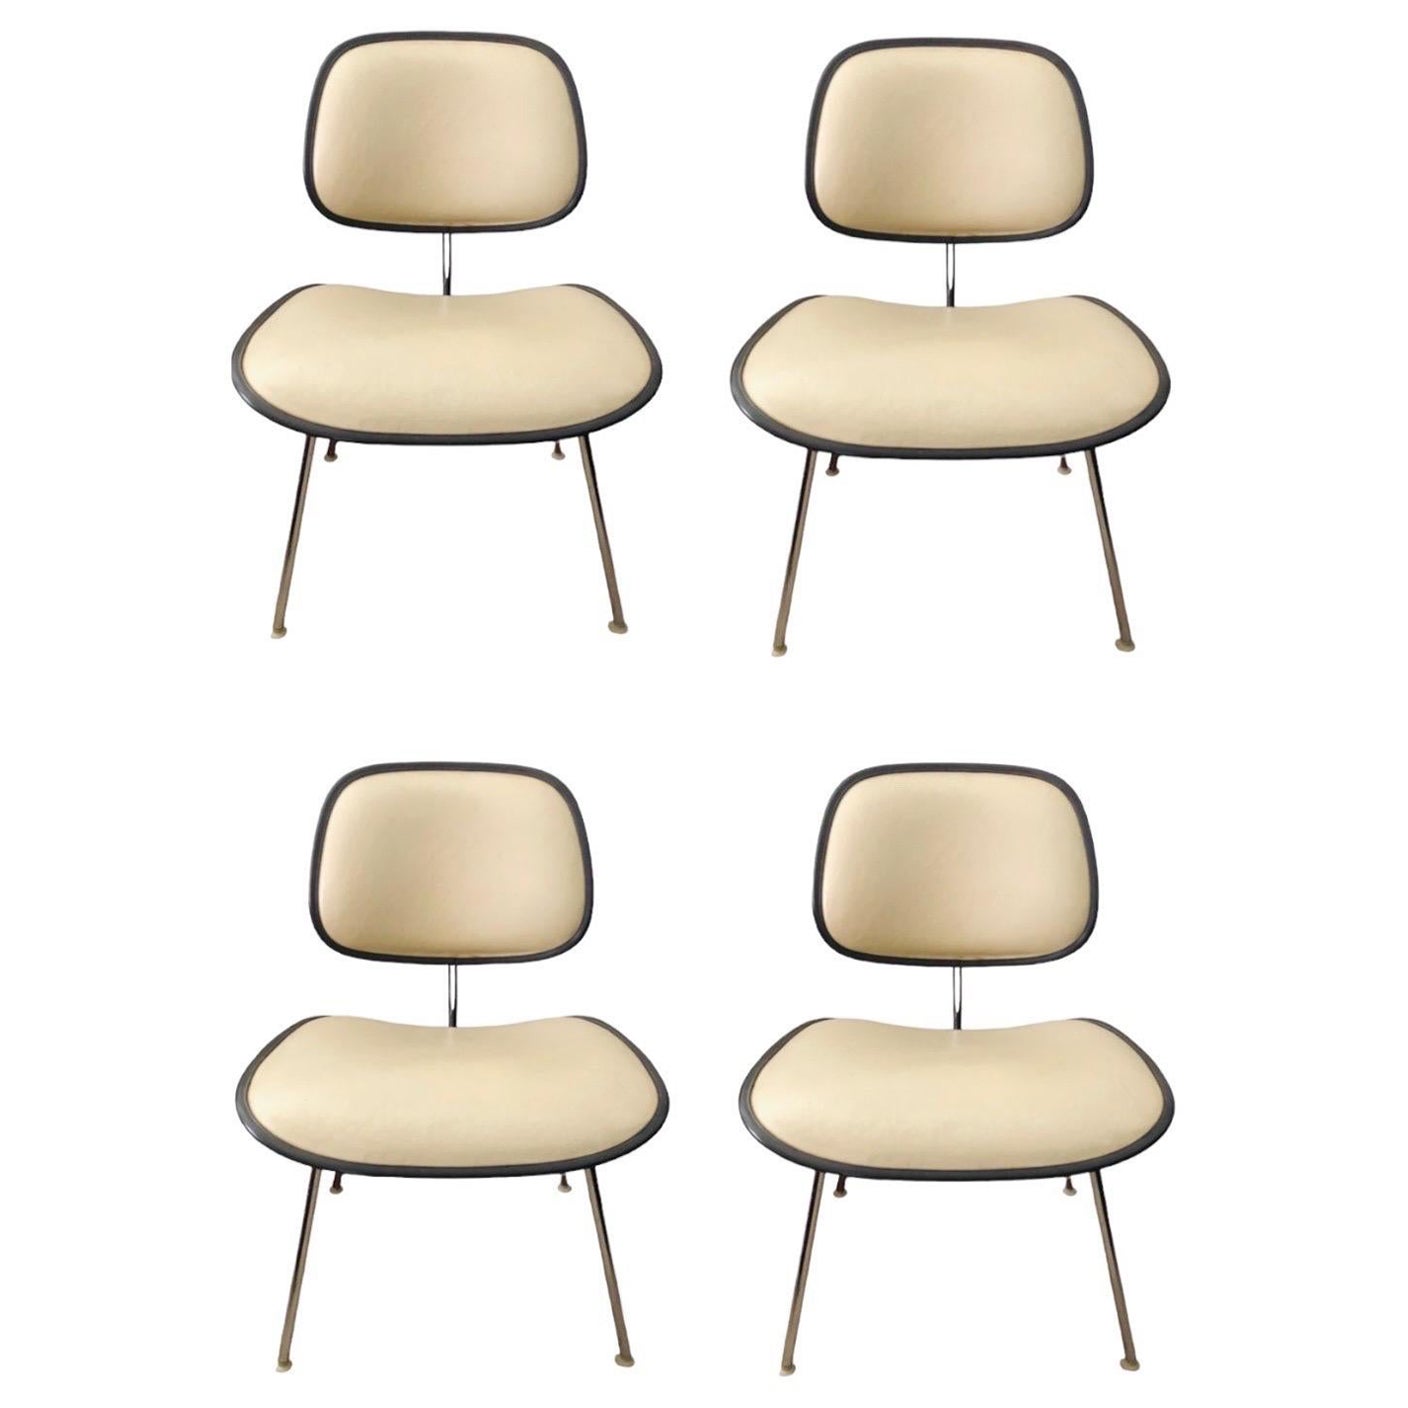 This is a pair of DCMU chairs, designed in 1970 by Charles and Ray Eames for Herman Miller. They were a newer, upholstered take on the classic bent wood DCM chair.

The seat and back are molded plastic, and these are currently upholstered in their